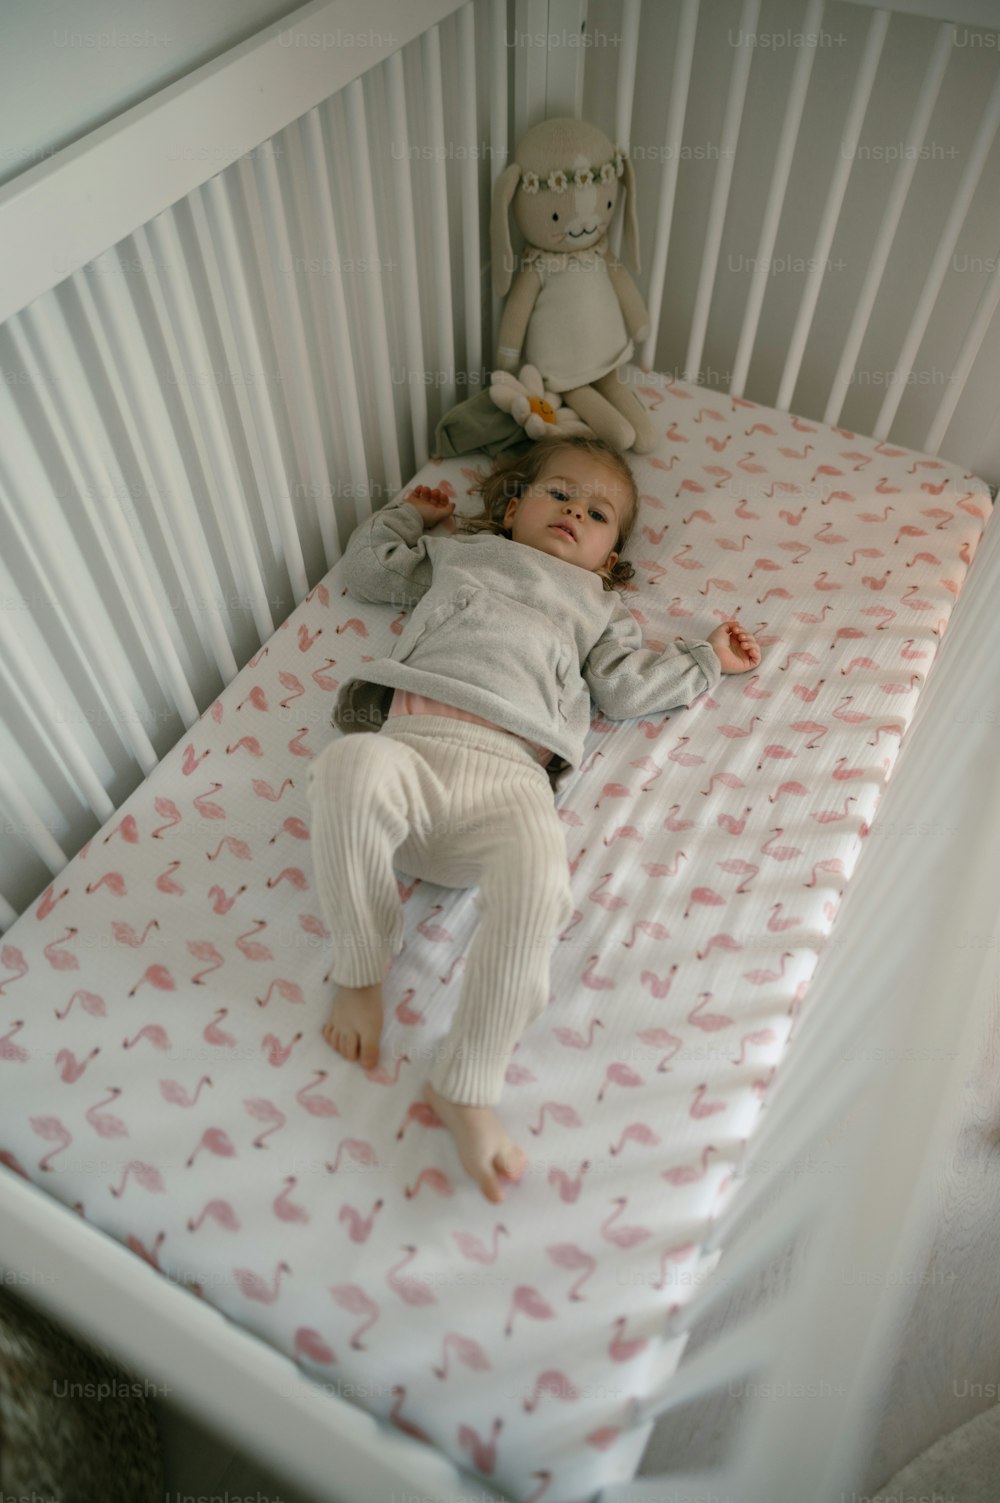 a baby laying in a crib with a stuffed animal